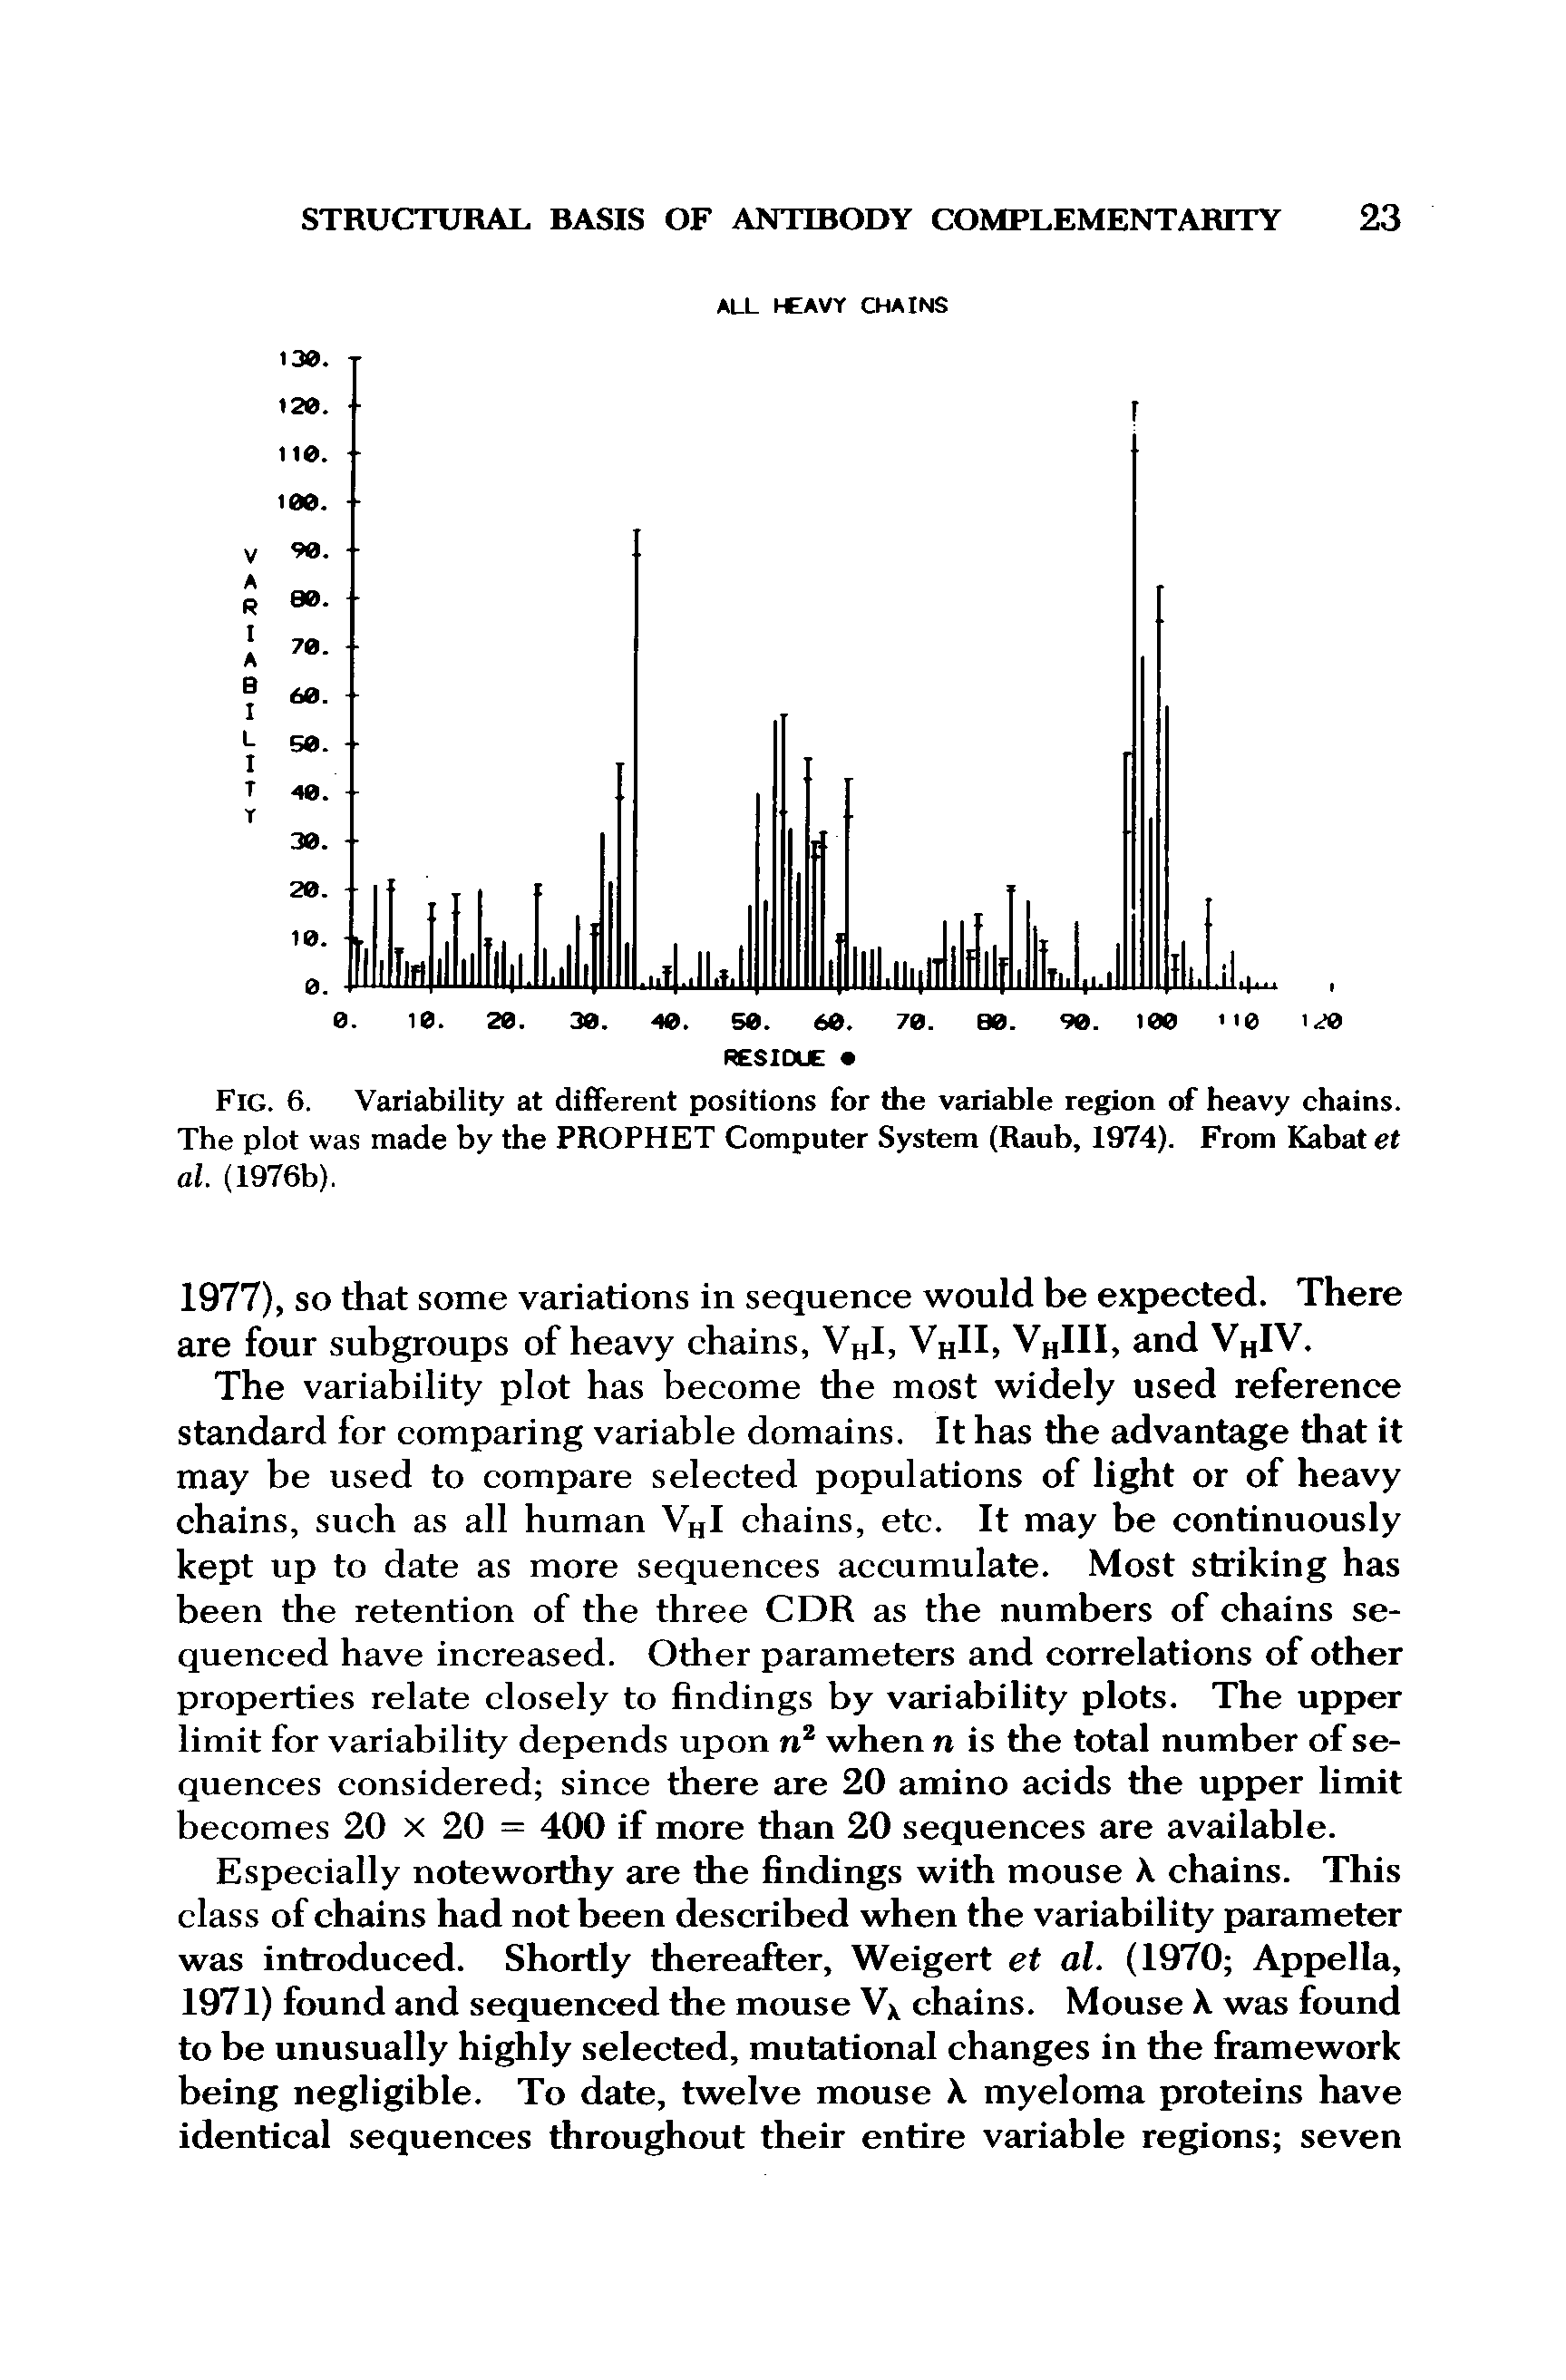 Fig. 6. Variability at different positions for the variable region of heavy chains. The plot was made by the PROPHET Computer System (Raub, 1974). From Kabat et al. (1976b).